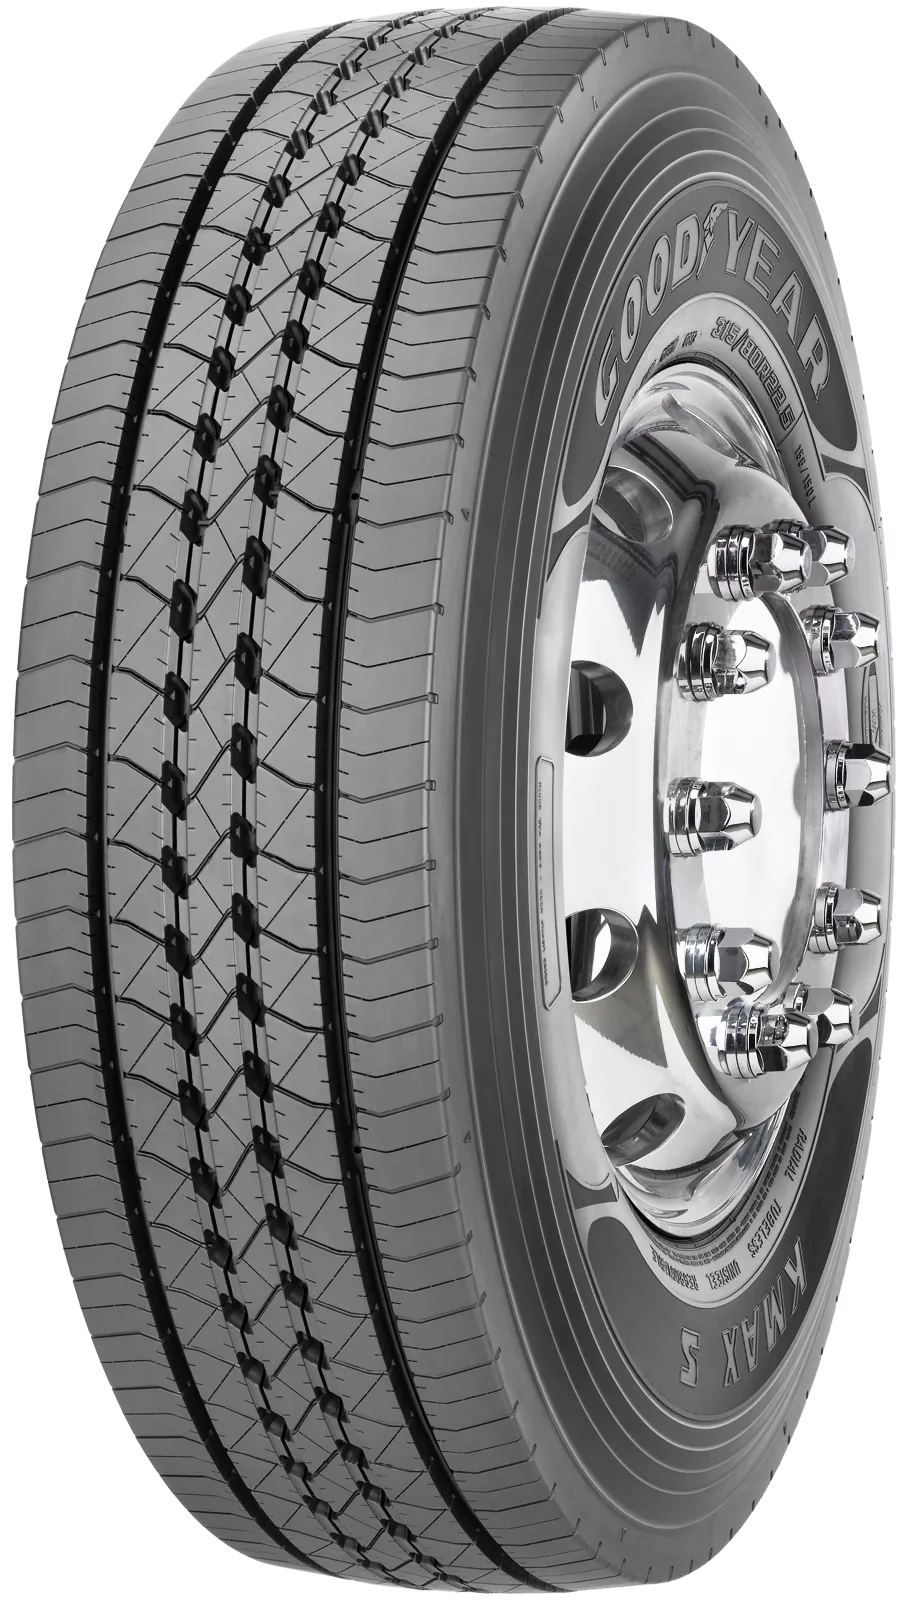 Anvelope camioane 315/70R22.5 156/150L Good Year Kmax S Gen-2 TL